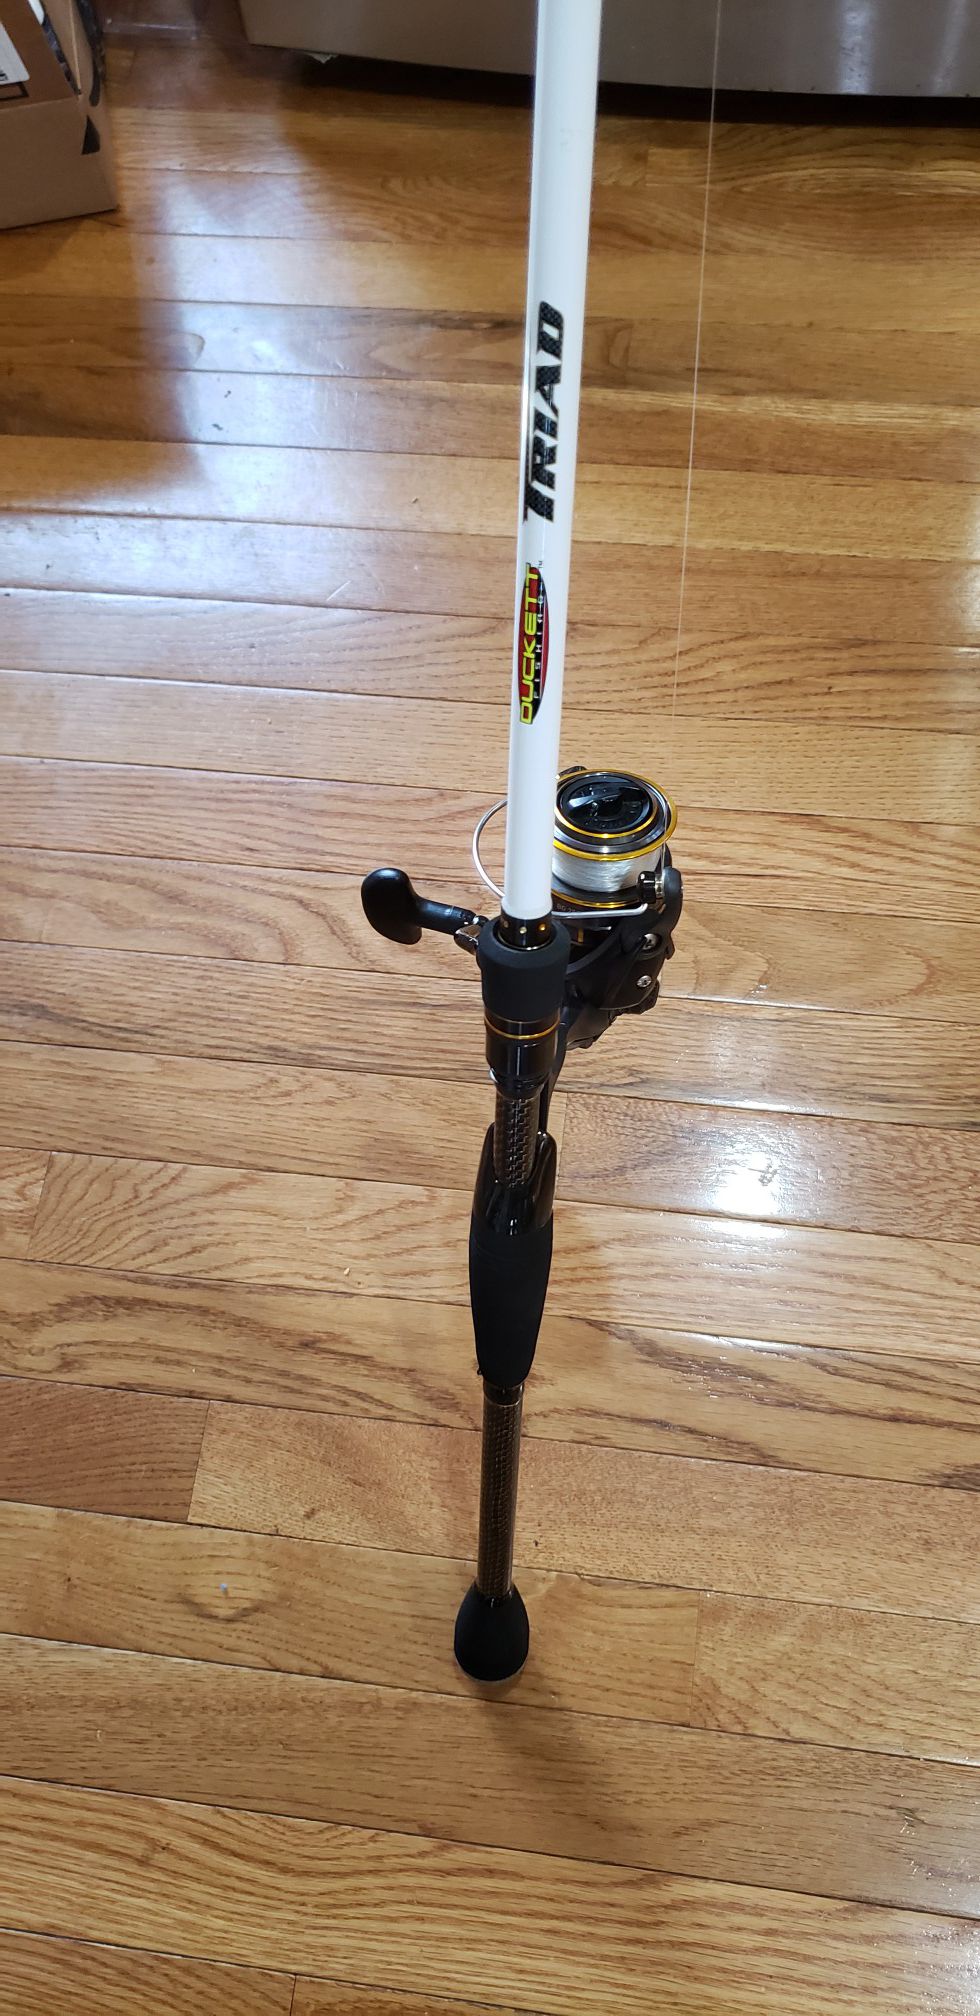 Duckett triad 7'2 med heavy with diawa bg 2500 series spinning reel. Rod has never been used. Great deal